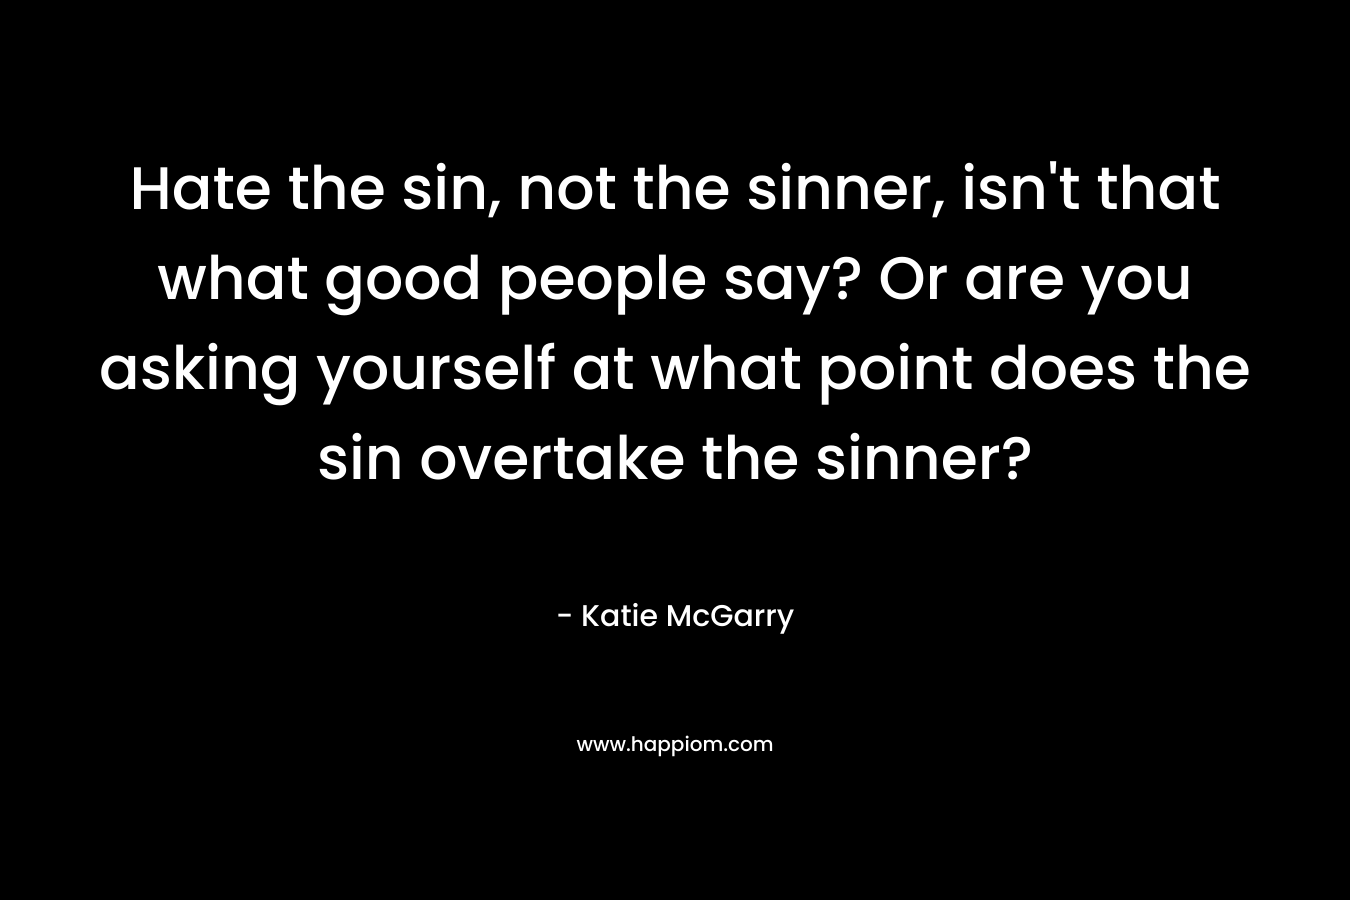 Hate the sin, not the sinner, isn’t that what good people say? Or are you asking yourself at what point does the sin overtake the sinner? – Katie McGarry